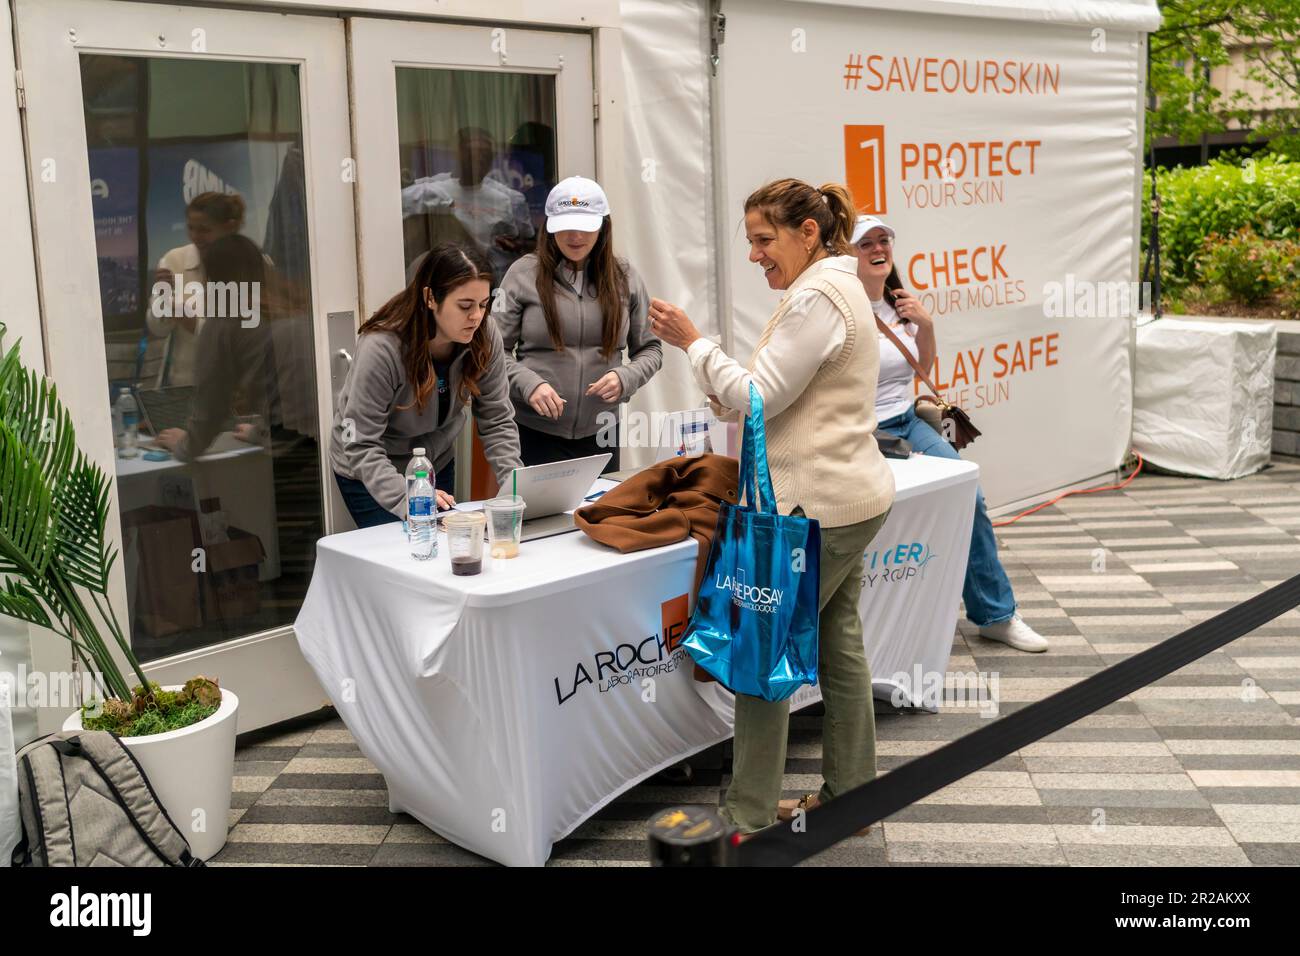 Visitors to Hudson Yards receive sunscreen samples after having their moles checked for skin cancer at a brand activation in Hudson Yards in New York for La Roche-Posay Laboratoire Dermatologique on Monday, May 1, 2023. La Roche-Posay is a brand of L’Oreal. (© Richard B. Levine) Stock Photo